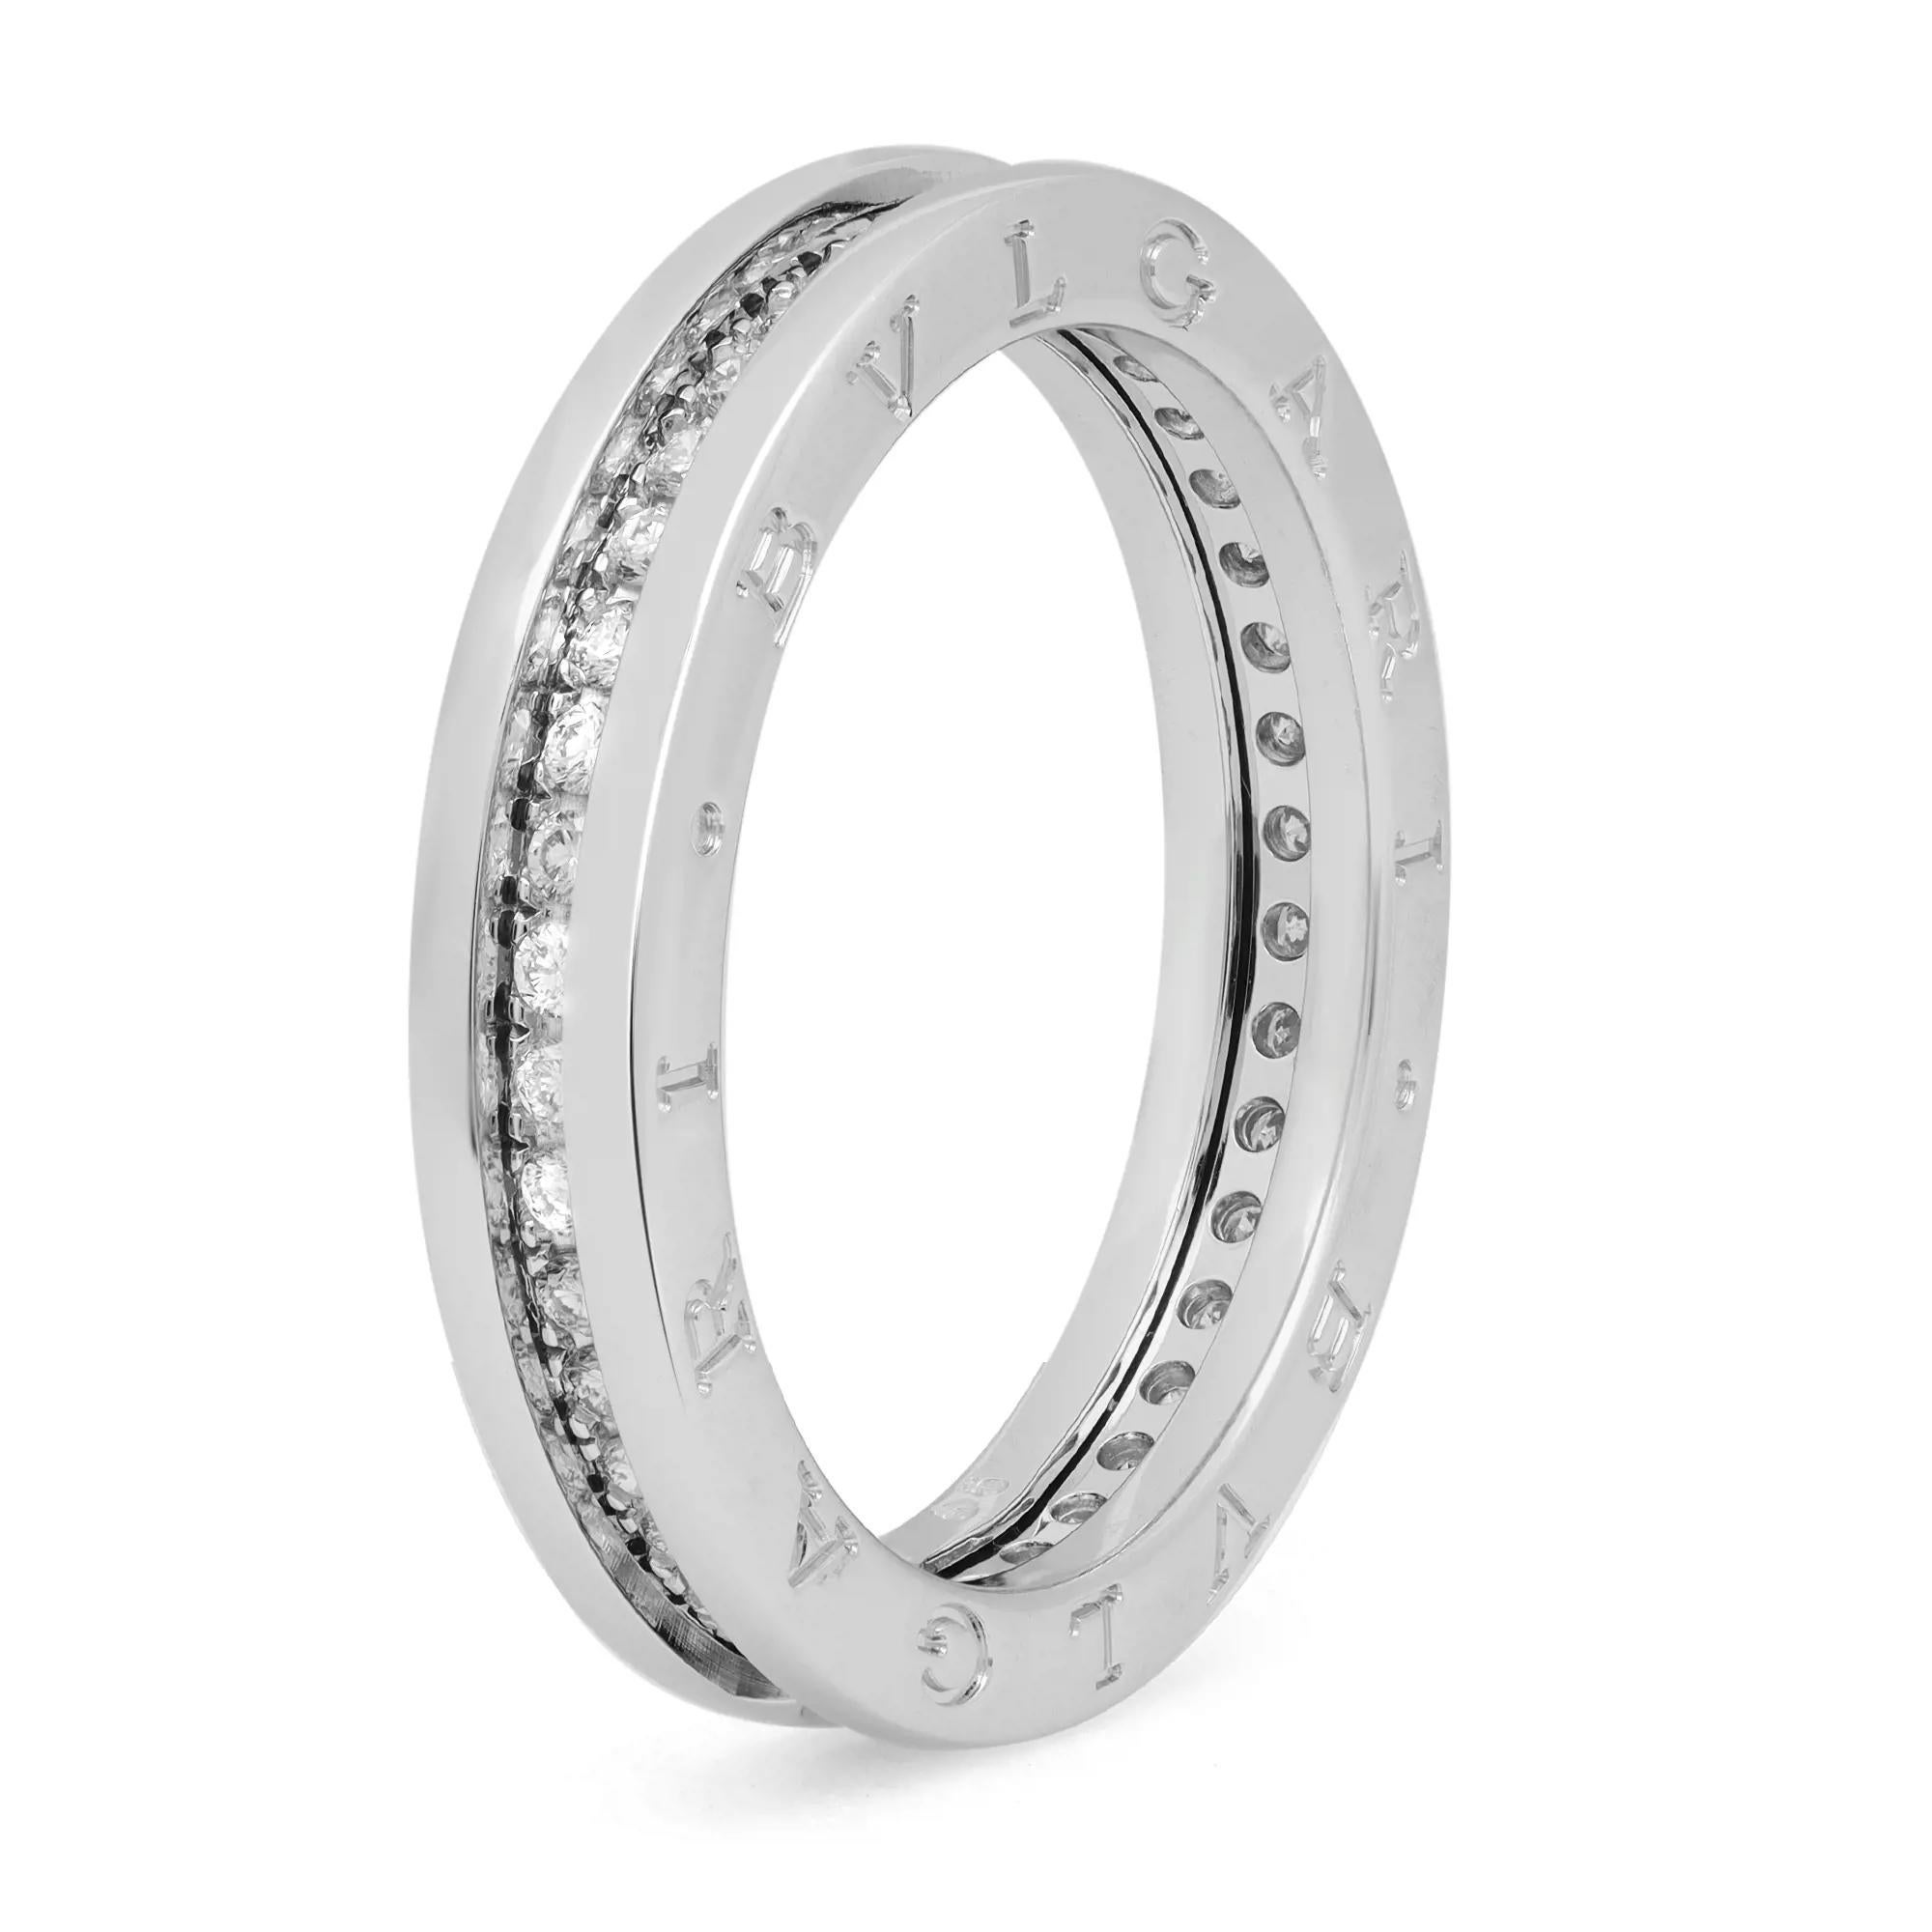 The B.Zero1 ring is a signature piece from the legendary jewelry design house Bvlgari. Crafted in fine 18K white gold. It features a clean modern one band ring with pave set round cut diamonds weighing 0.60 carat. The outer rims are engraved with